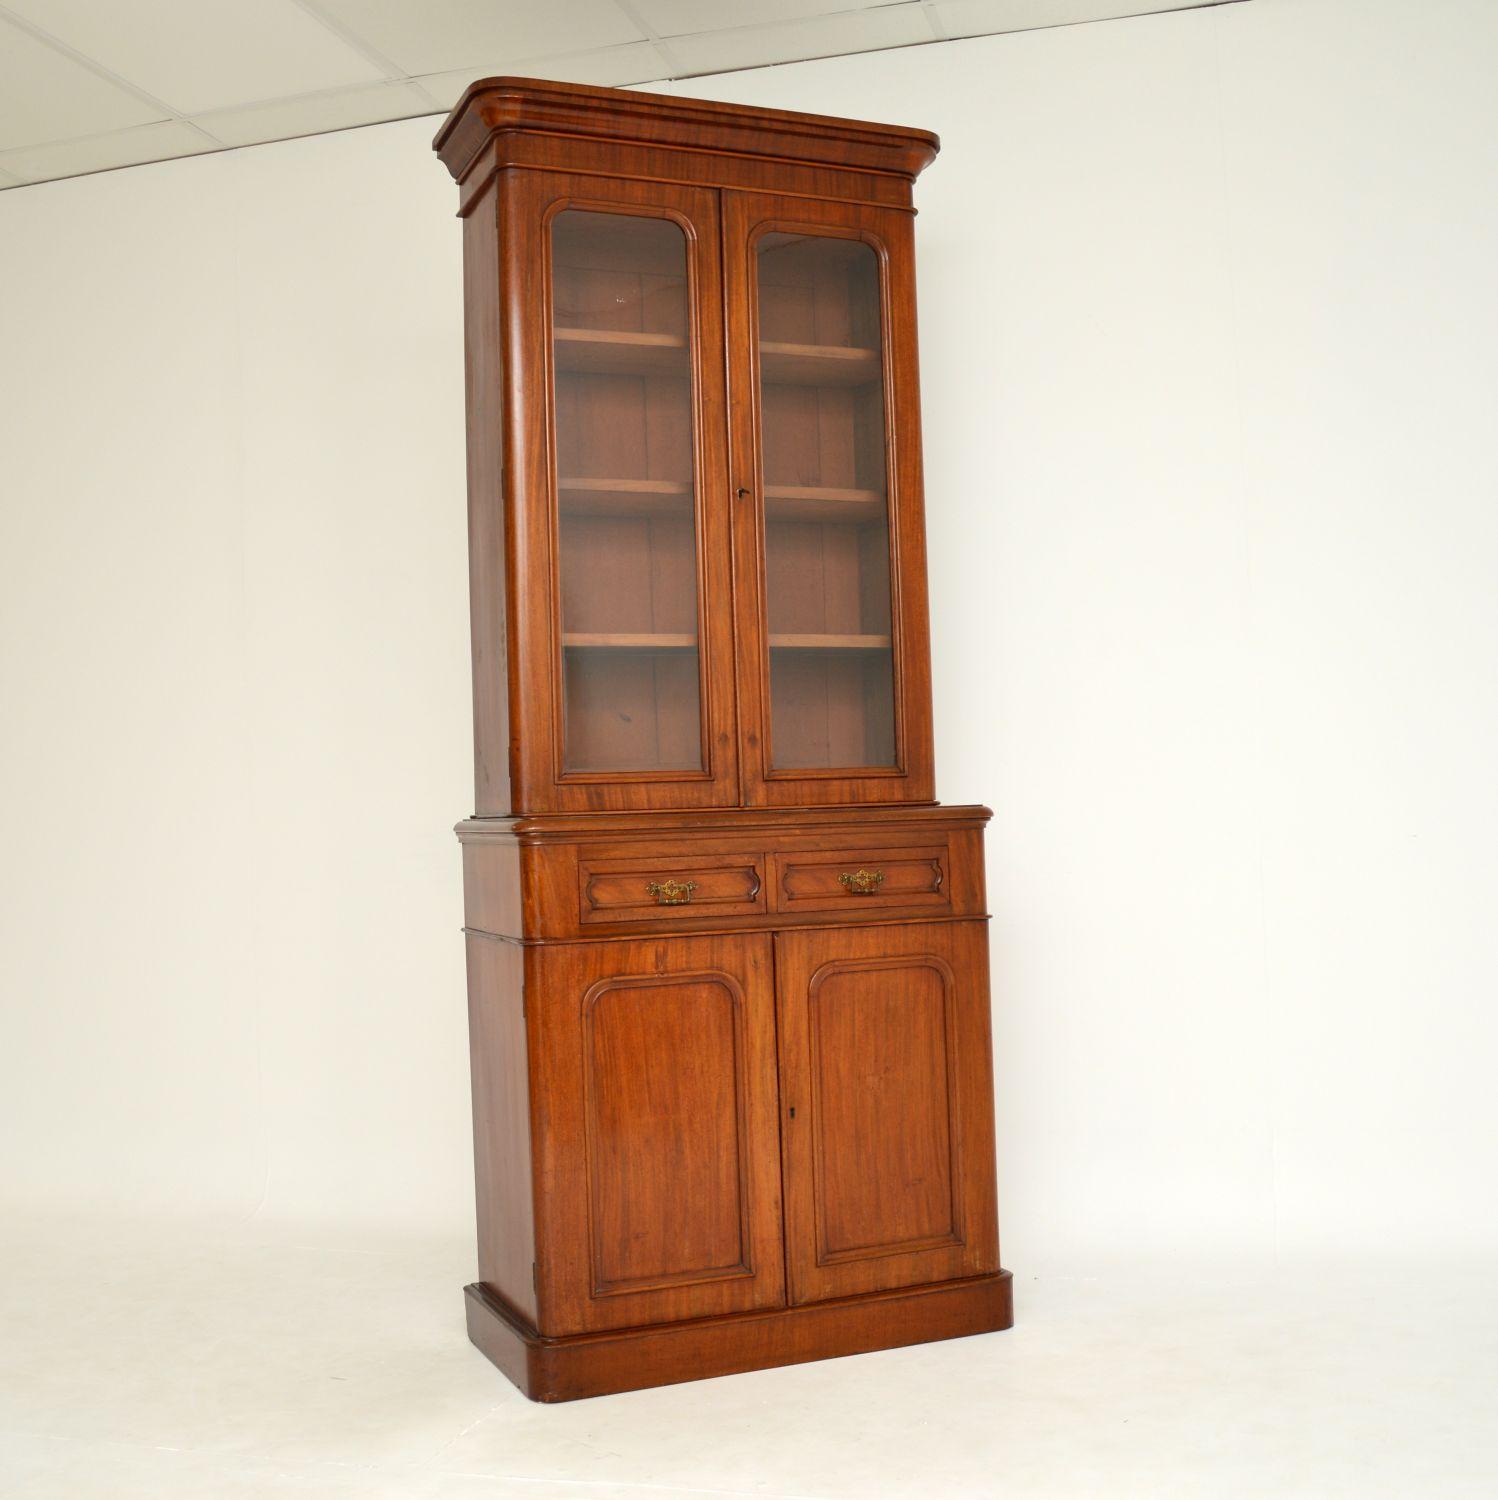 An excellent antique Victorian bookcase. This was made in England, it dates from around the 1860-1880 period.

It’s a great size, very tall and slim, with lots of storage space. The quality is very good, this is well made, sturdy and sound.

The